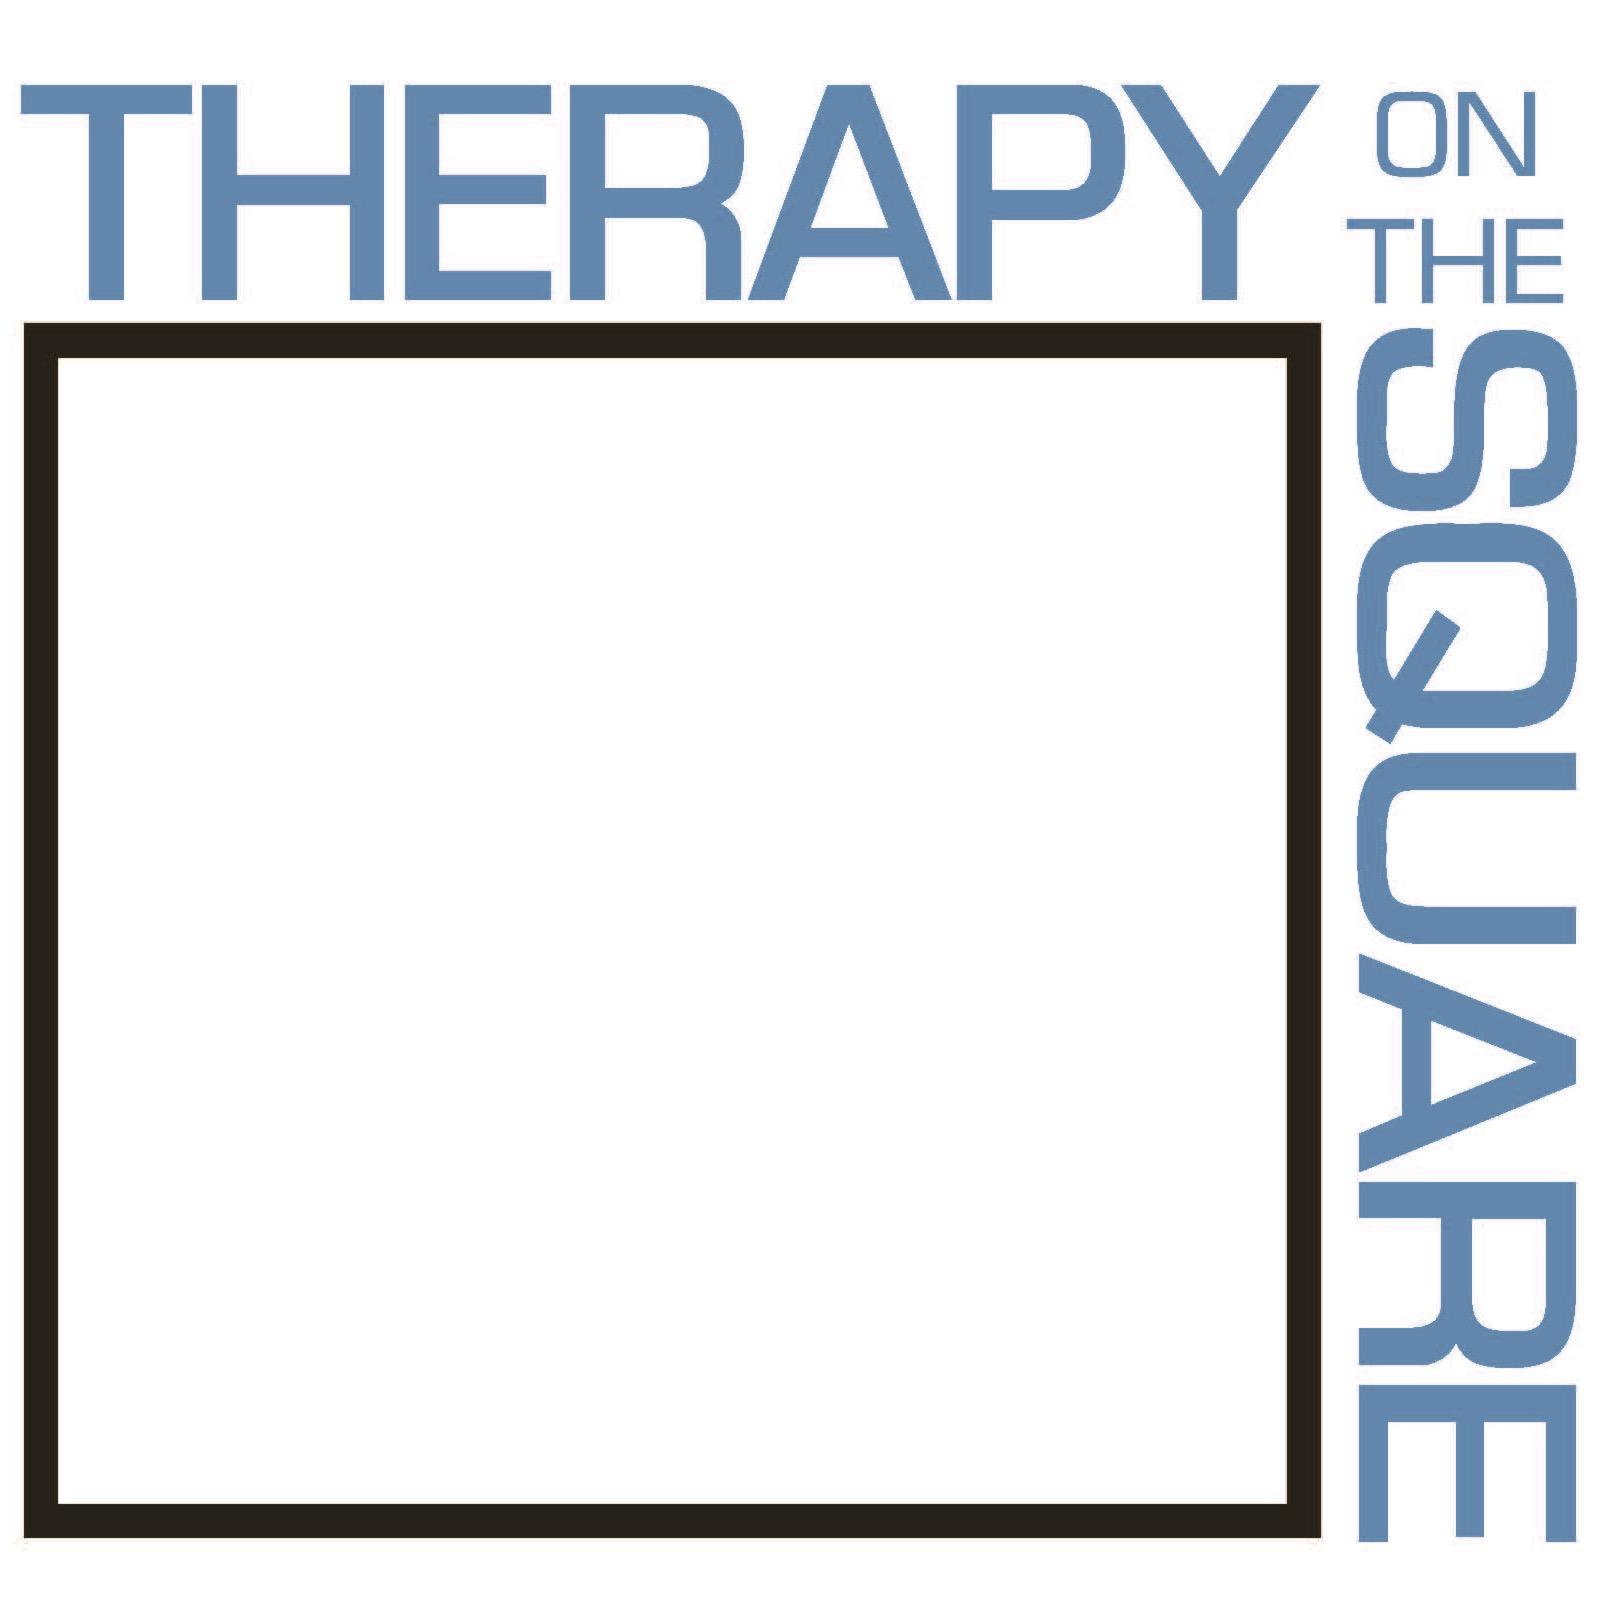 Therapy on the Square offers comprehensive therapeutic care for every member of the family!